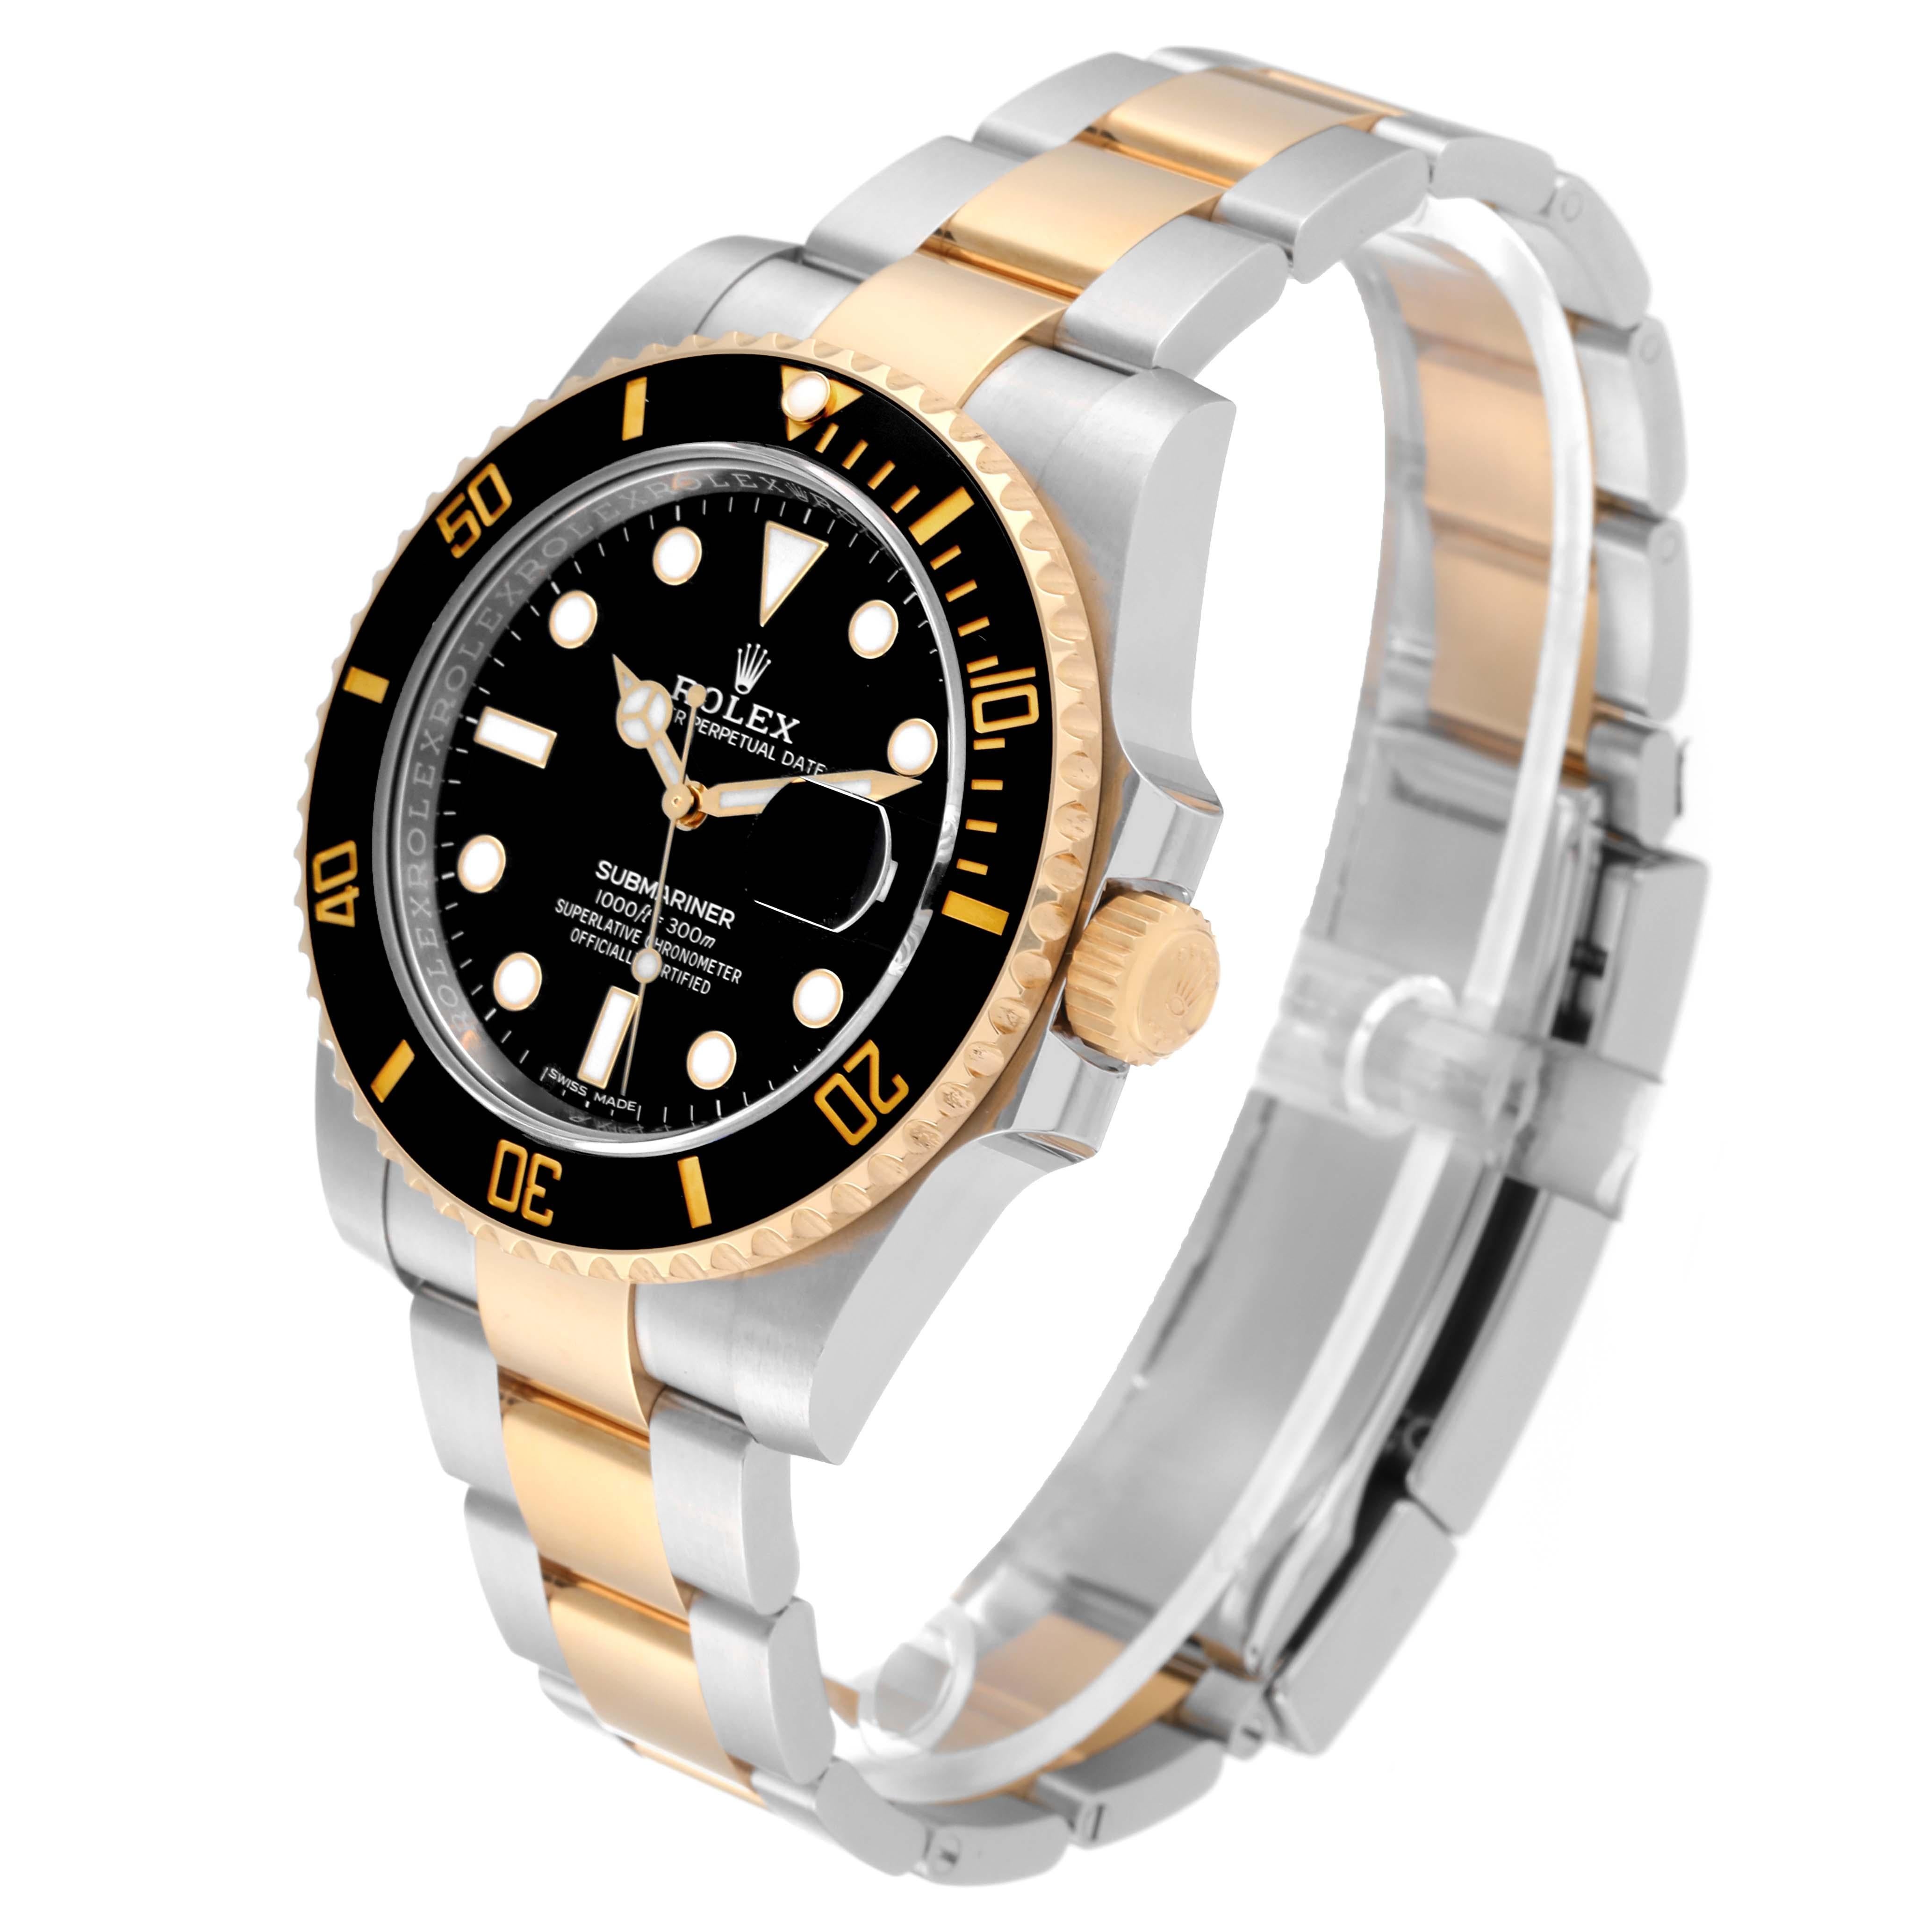 Rolex Submariner Steel Yellow Gold Black Dial Mens Watch 116613 Box Card 2